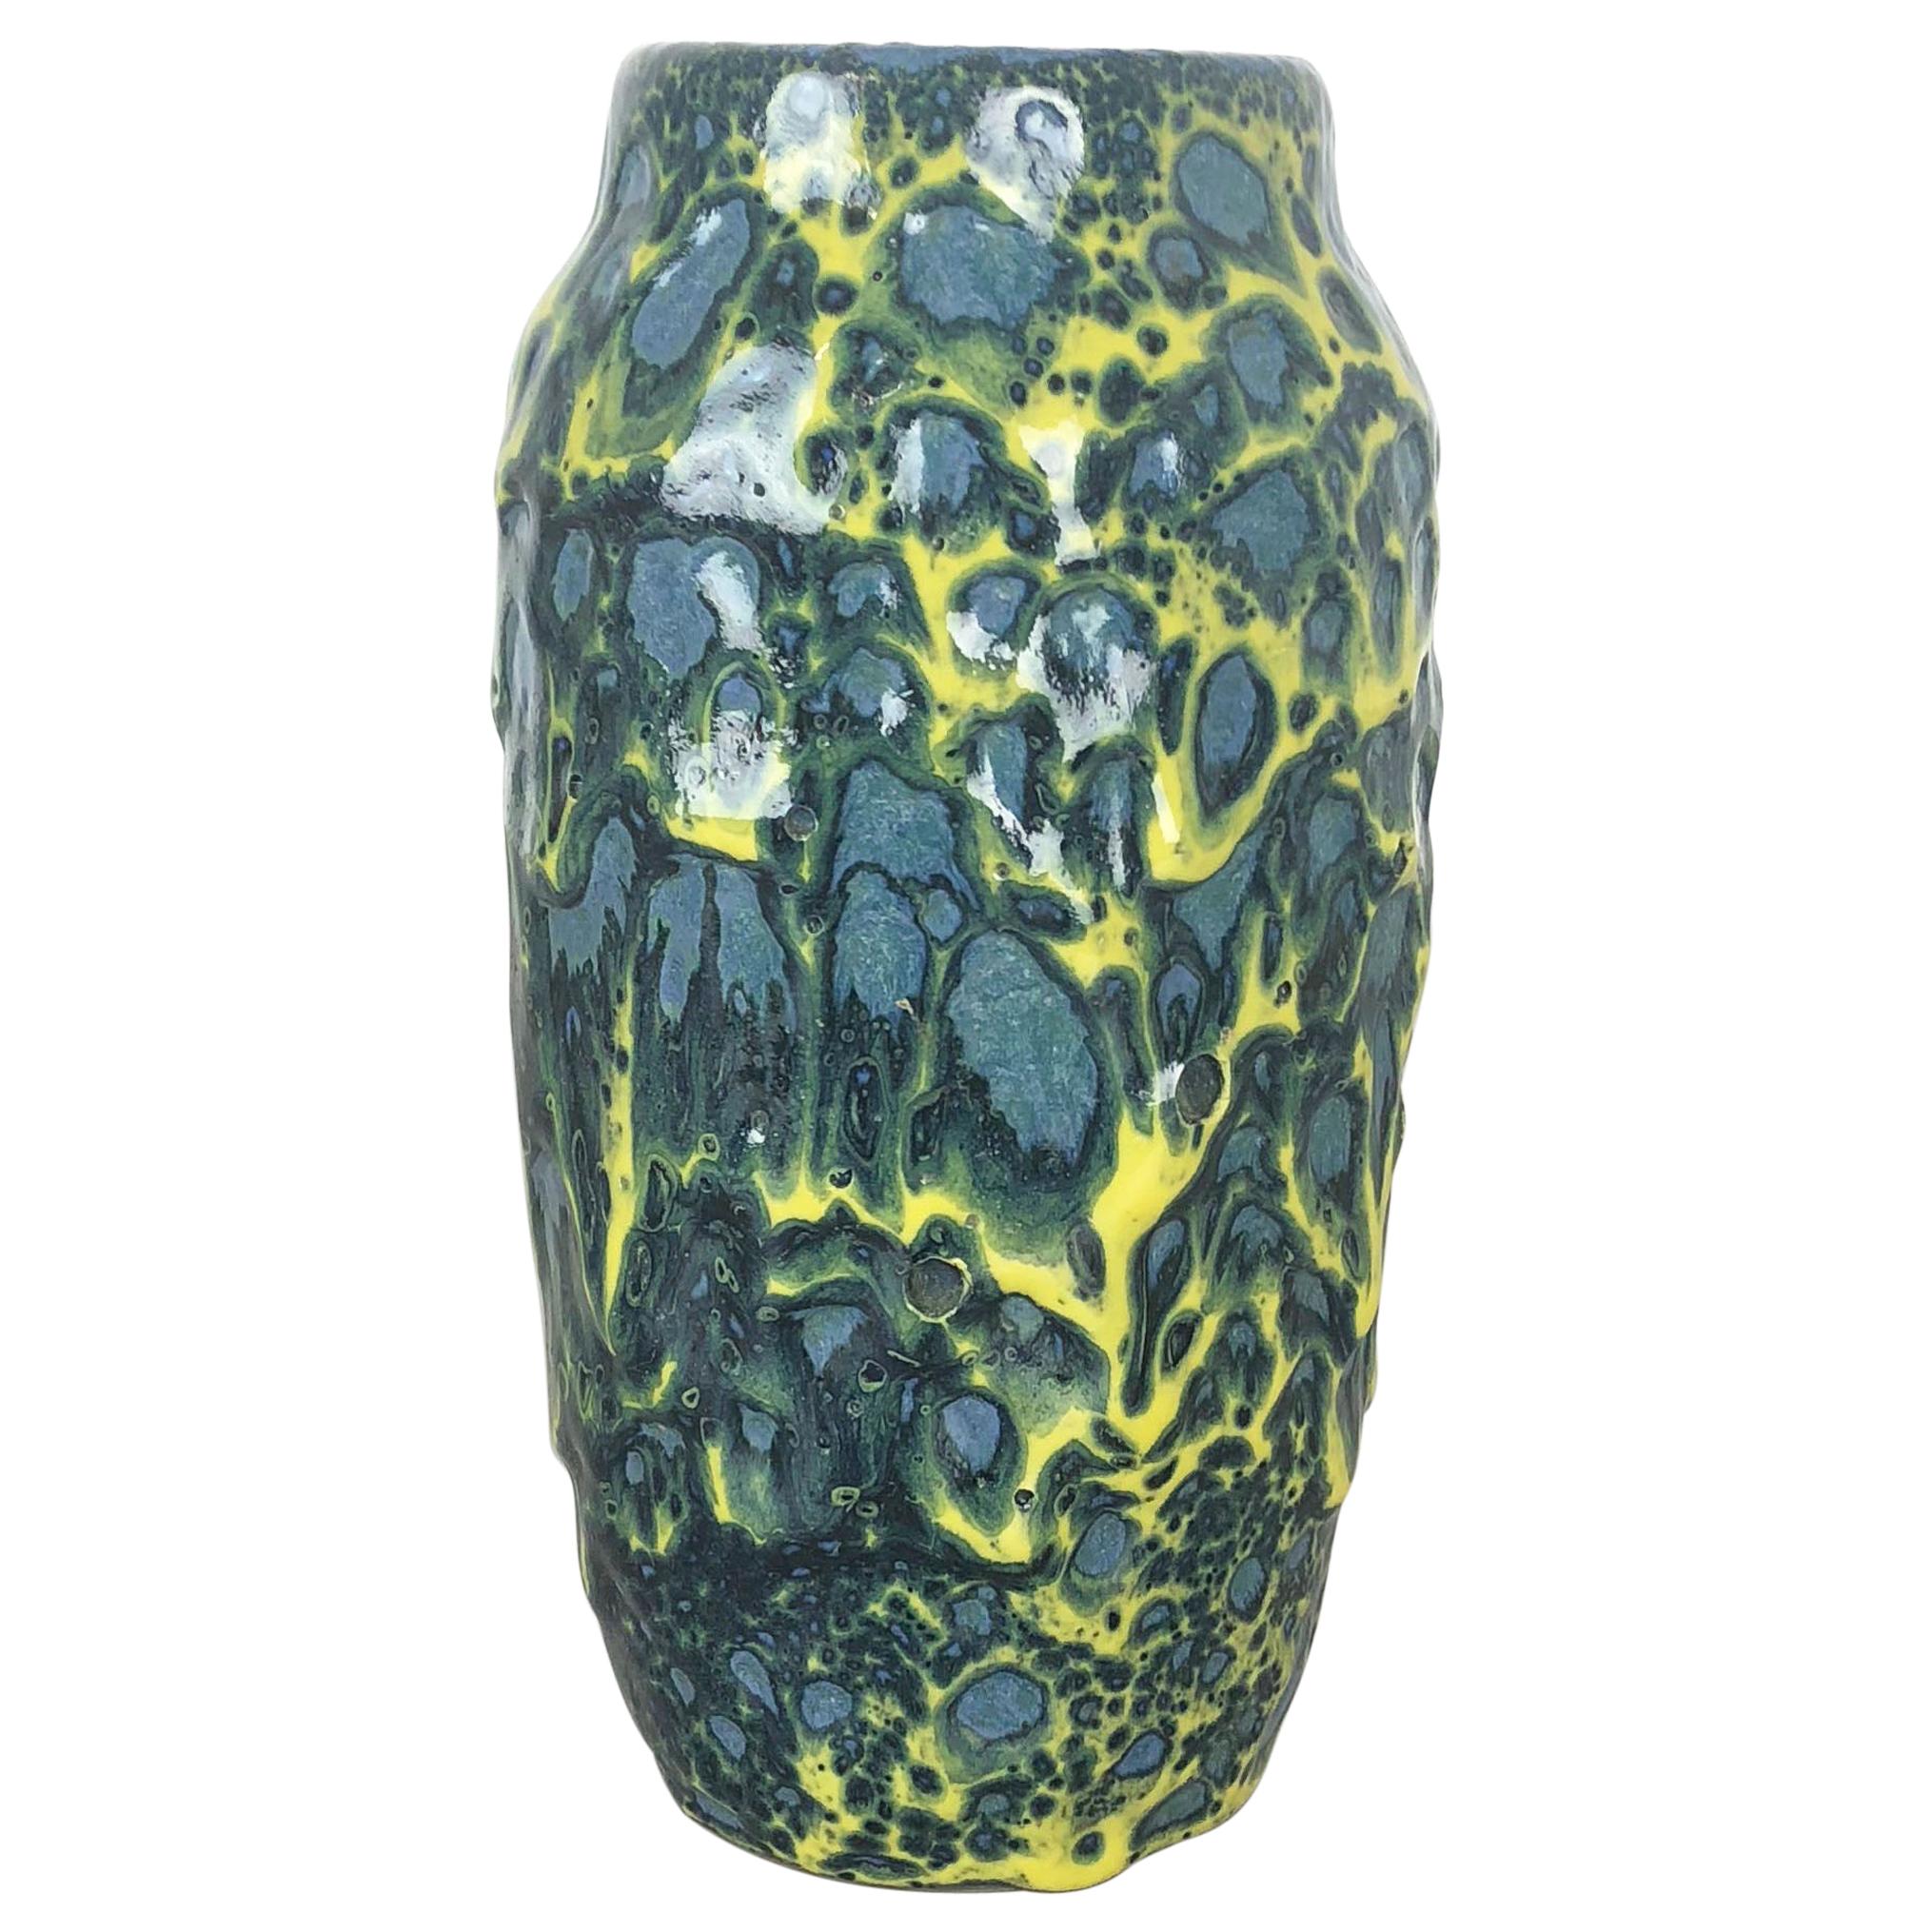 Extraordinary Vintage Pottery Fat Lava Vase Made by Scheurich, Germany, 1970s